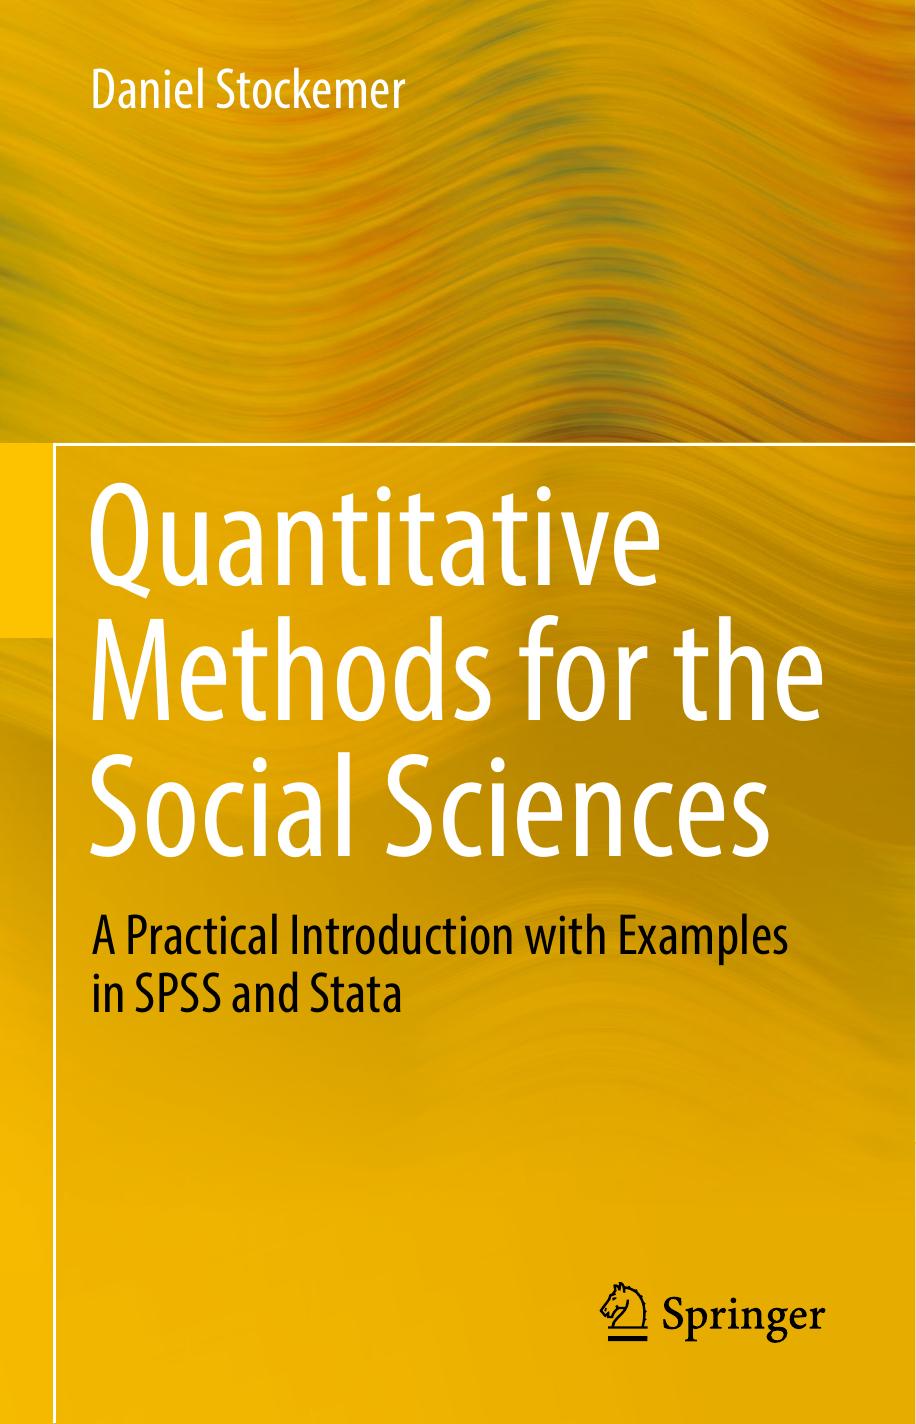 32 Quantitative Methods for the Social Sciences  A Practical Introduction with Examples in SPSS and Stata 2019